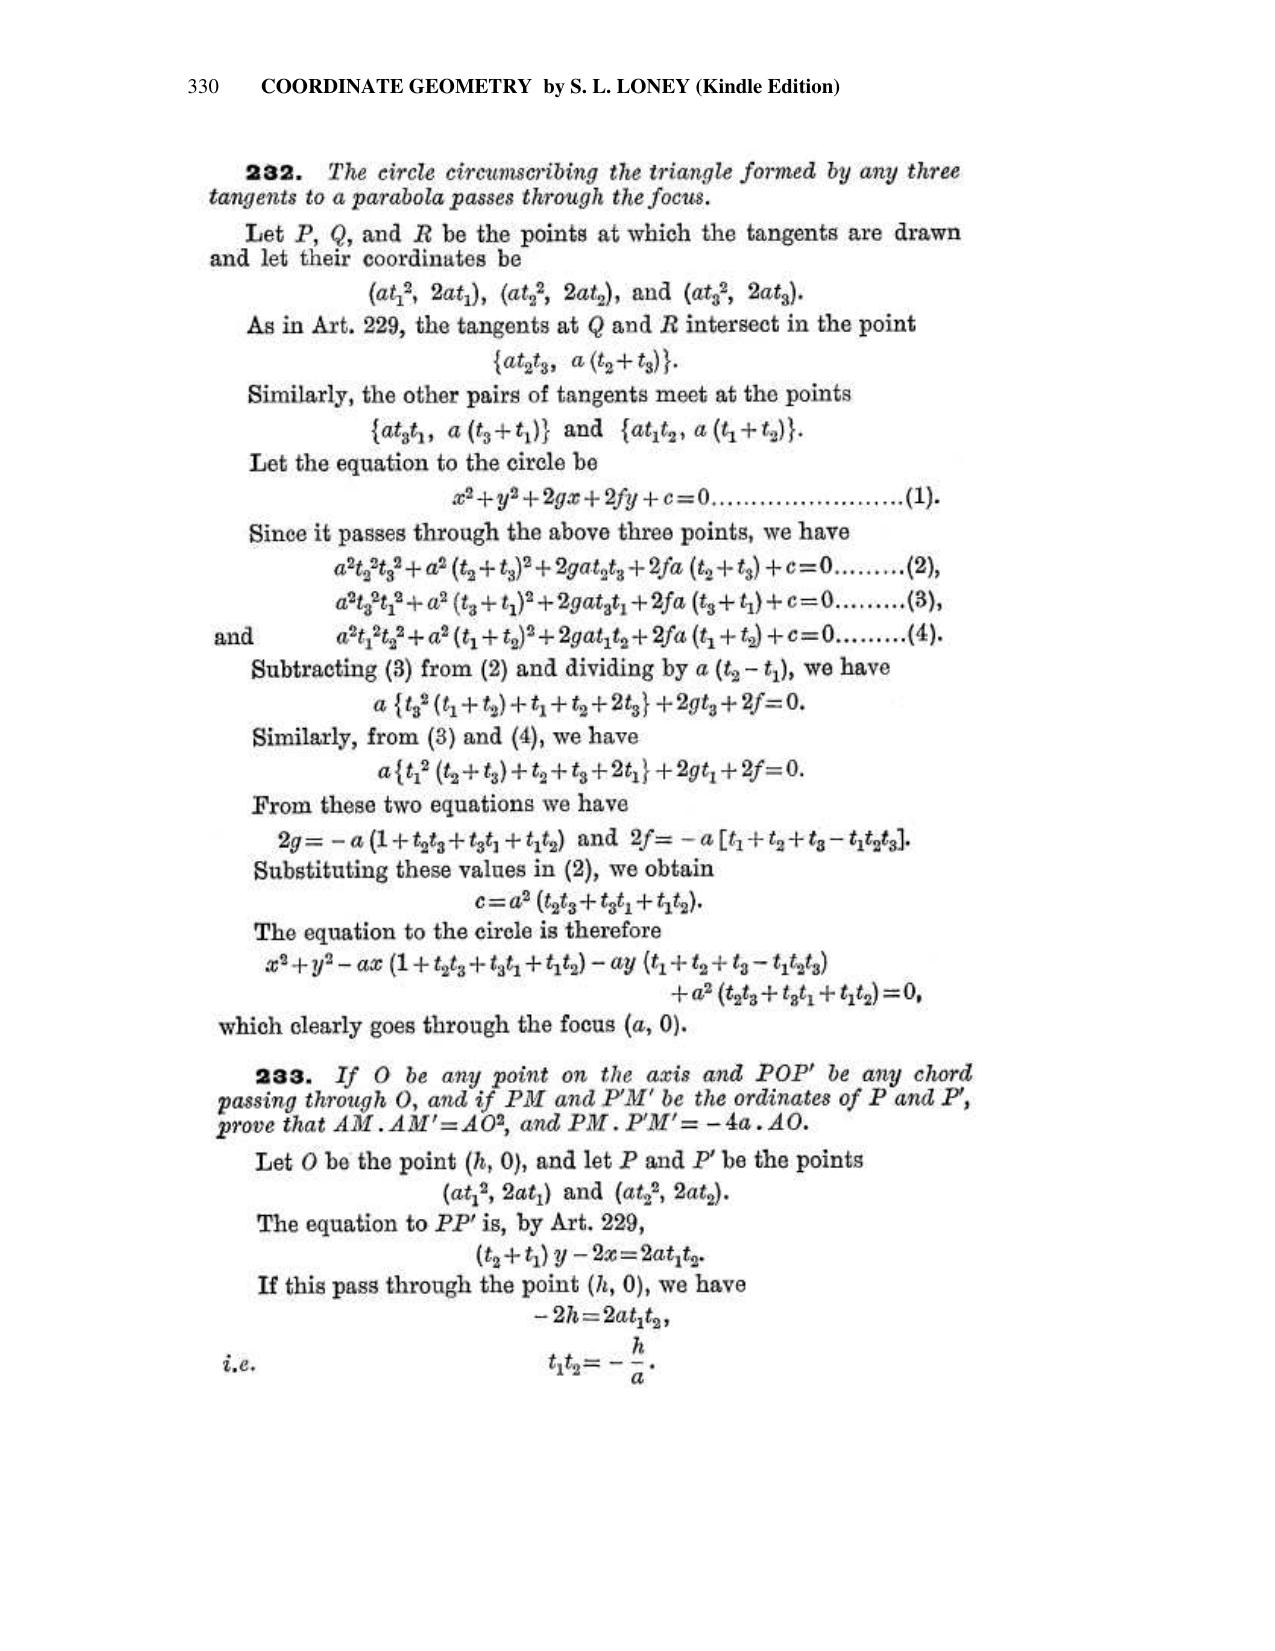 Chapter 10: The Parabola - SL Loney Solutions: The Elements of Coordinate Geometry - Page 44